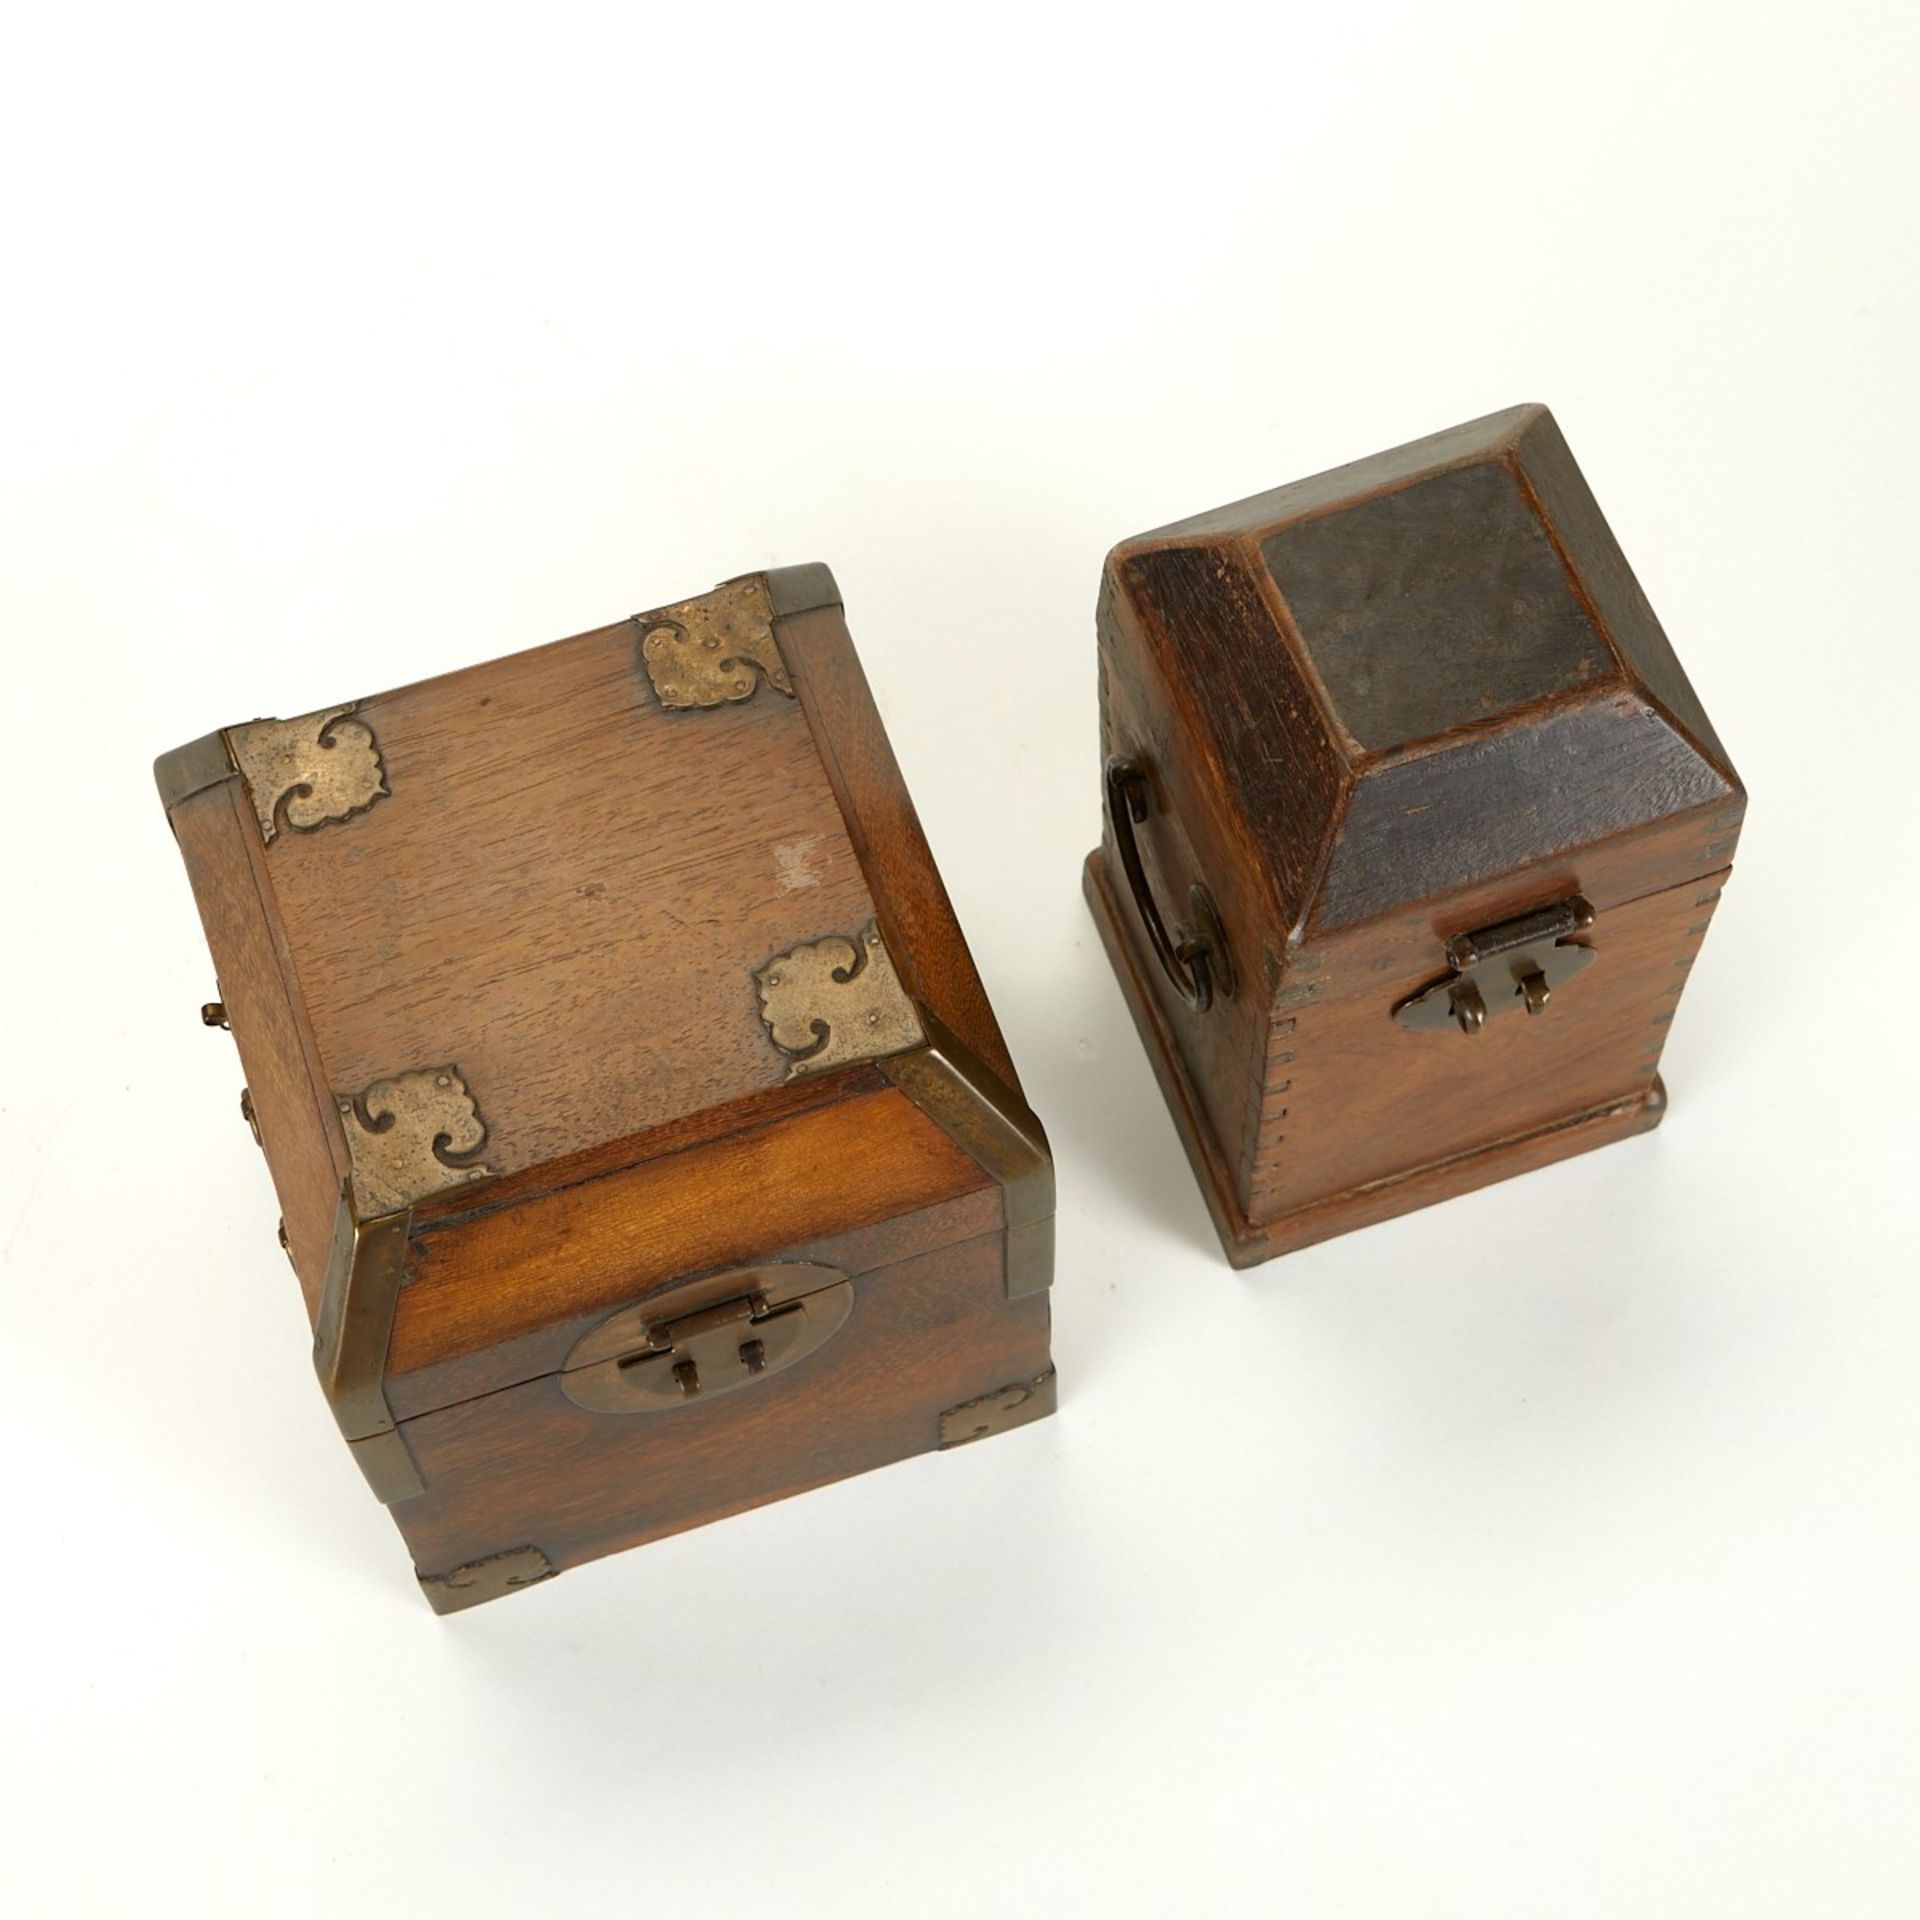 Pr: Chinese Wooden Boxes - Image 7 of 8